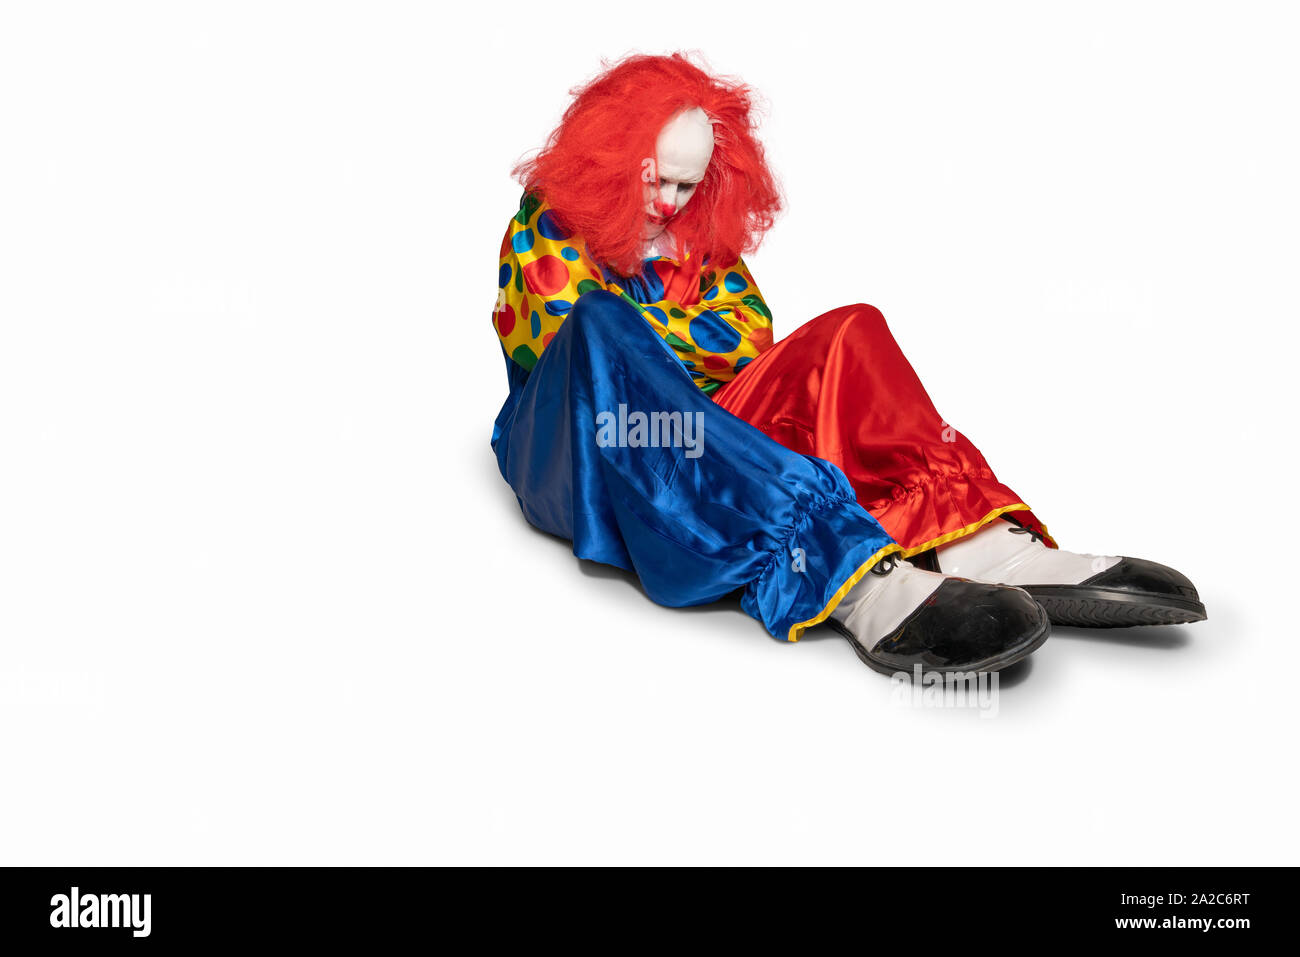 sad clown is sitting on the floor looking down Stock Photo